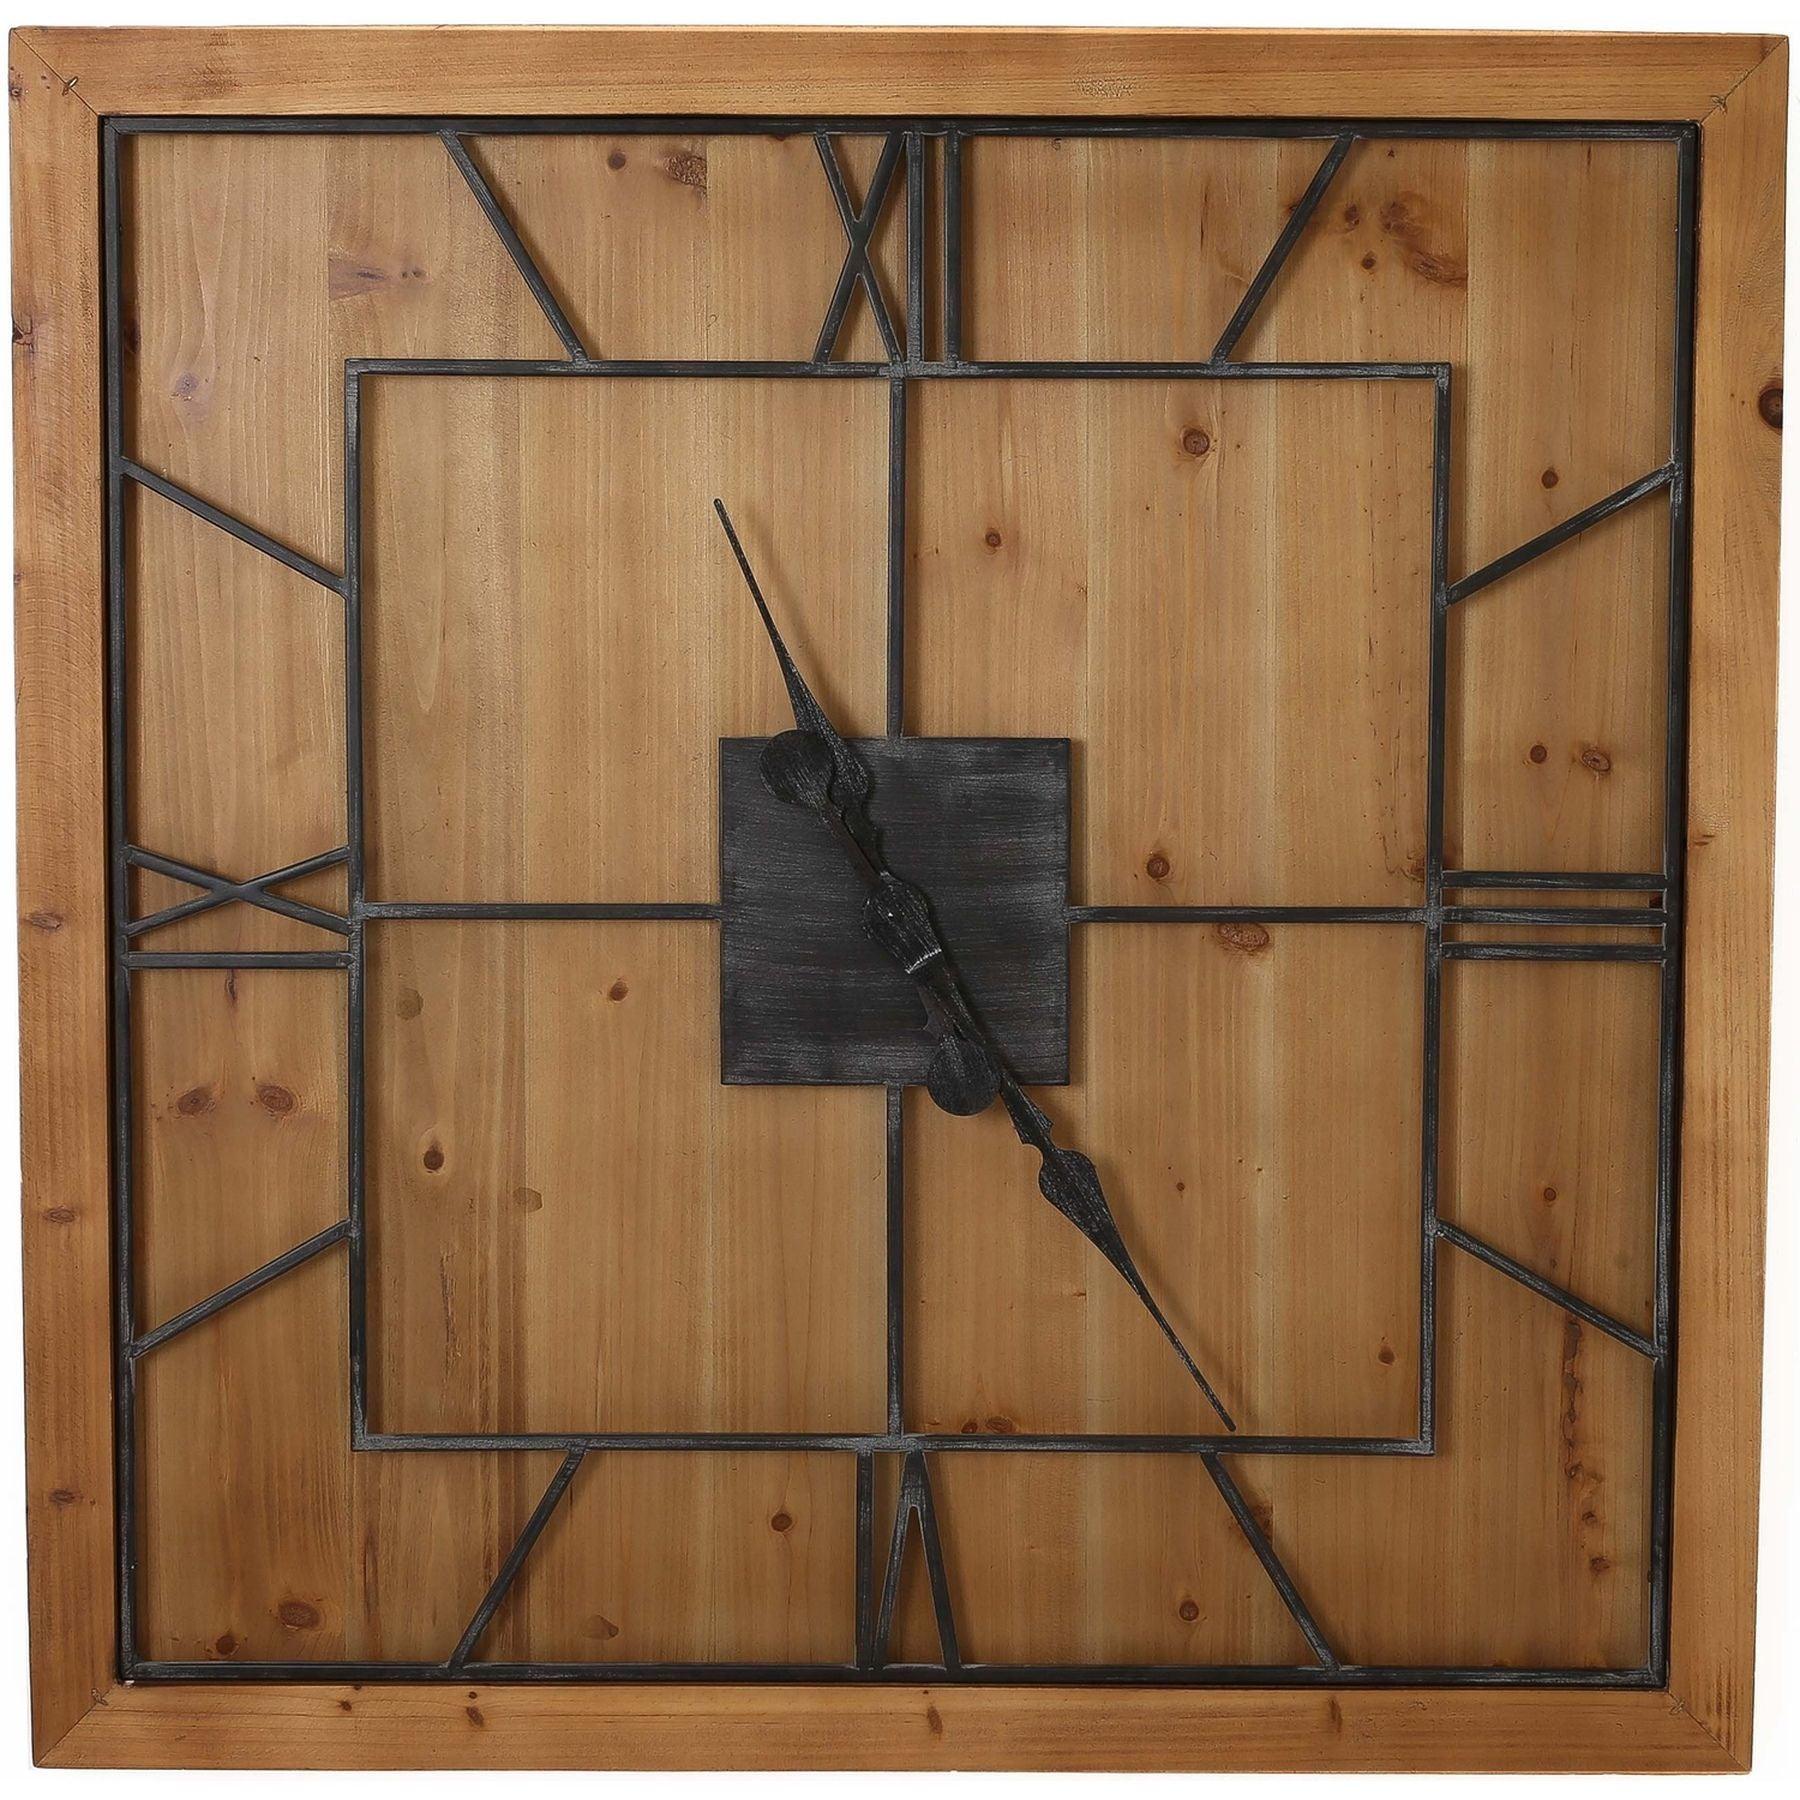 View Williston Square Wooden Wall Clock information